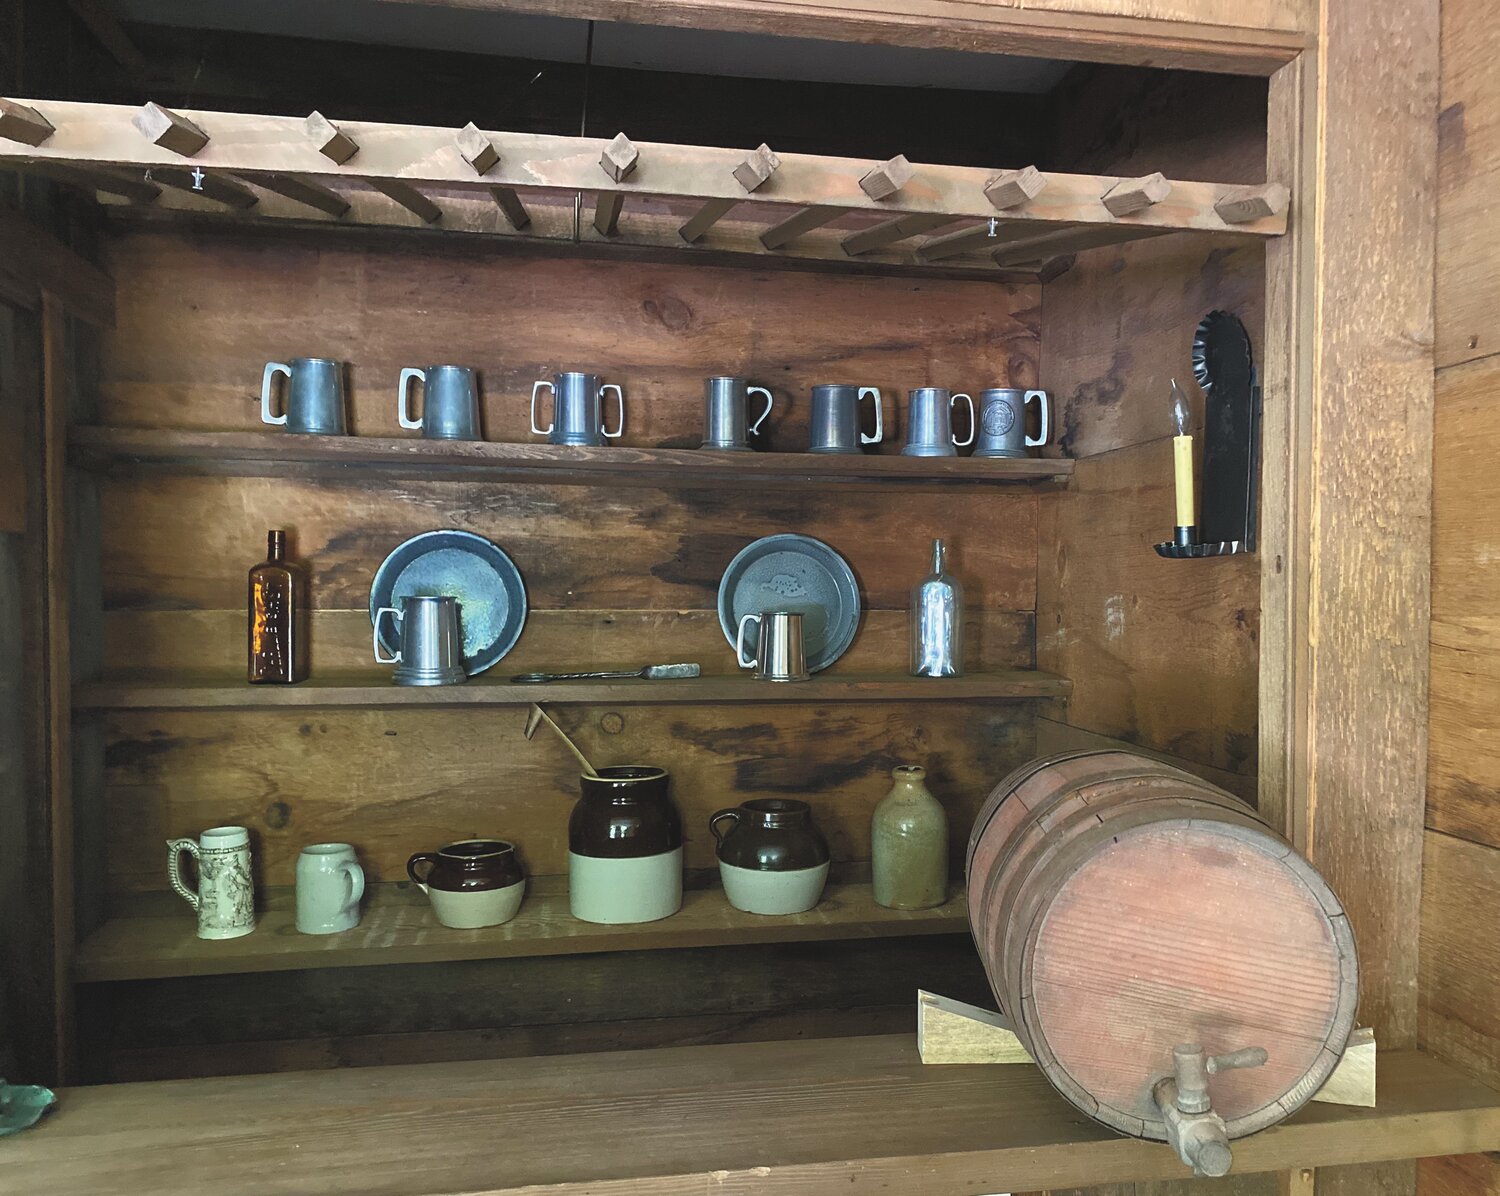 The Hunting Tavern’s tap room ‘bar.’ In the 1800s, customers gathered here to read newspapers and pick up mail delivered by the stagecoach traveling along what is now Main Street. Mr. Hunting provided clay pipes and tobacco, alcoholic drinks including beer, cider and rum.